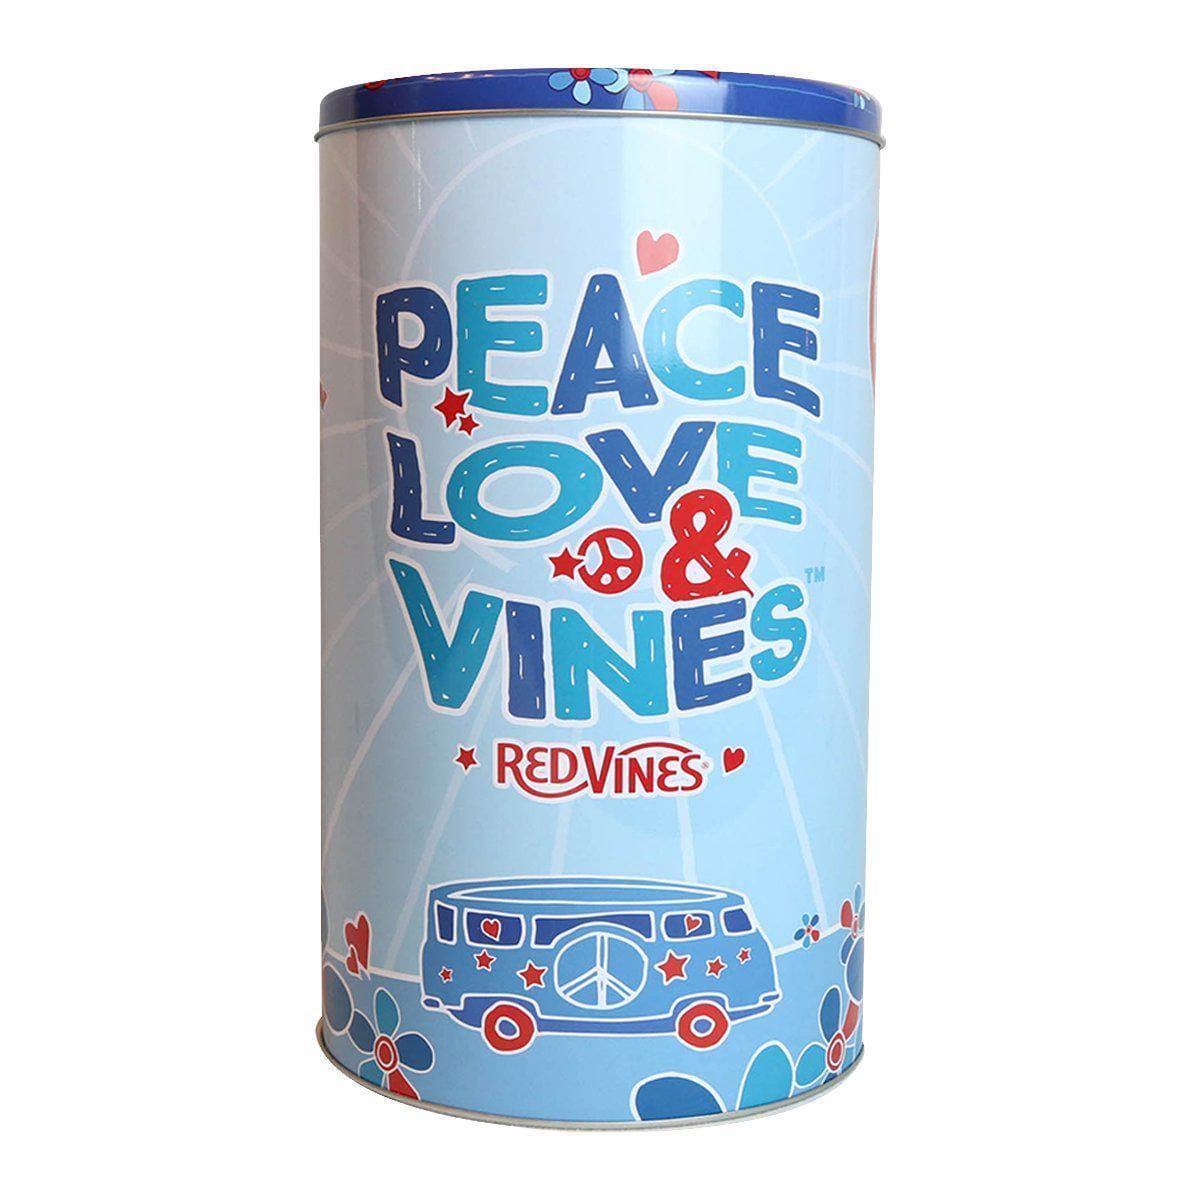 Front of RED VINES Tin with "PEACE LOVE & VINES" text, Red Vines logo, and van drawing